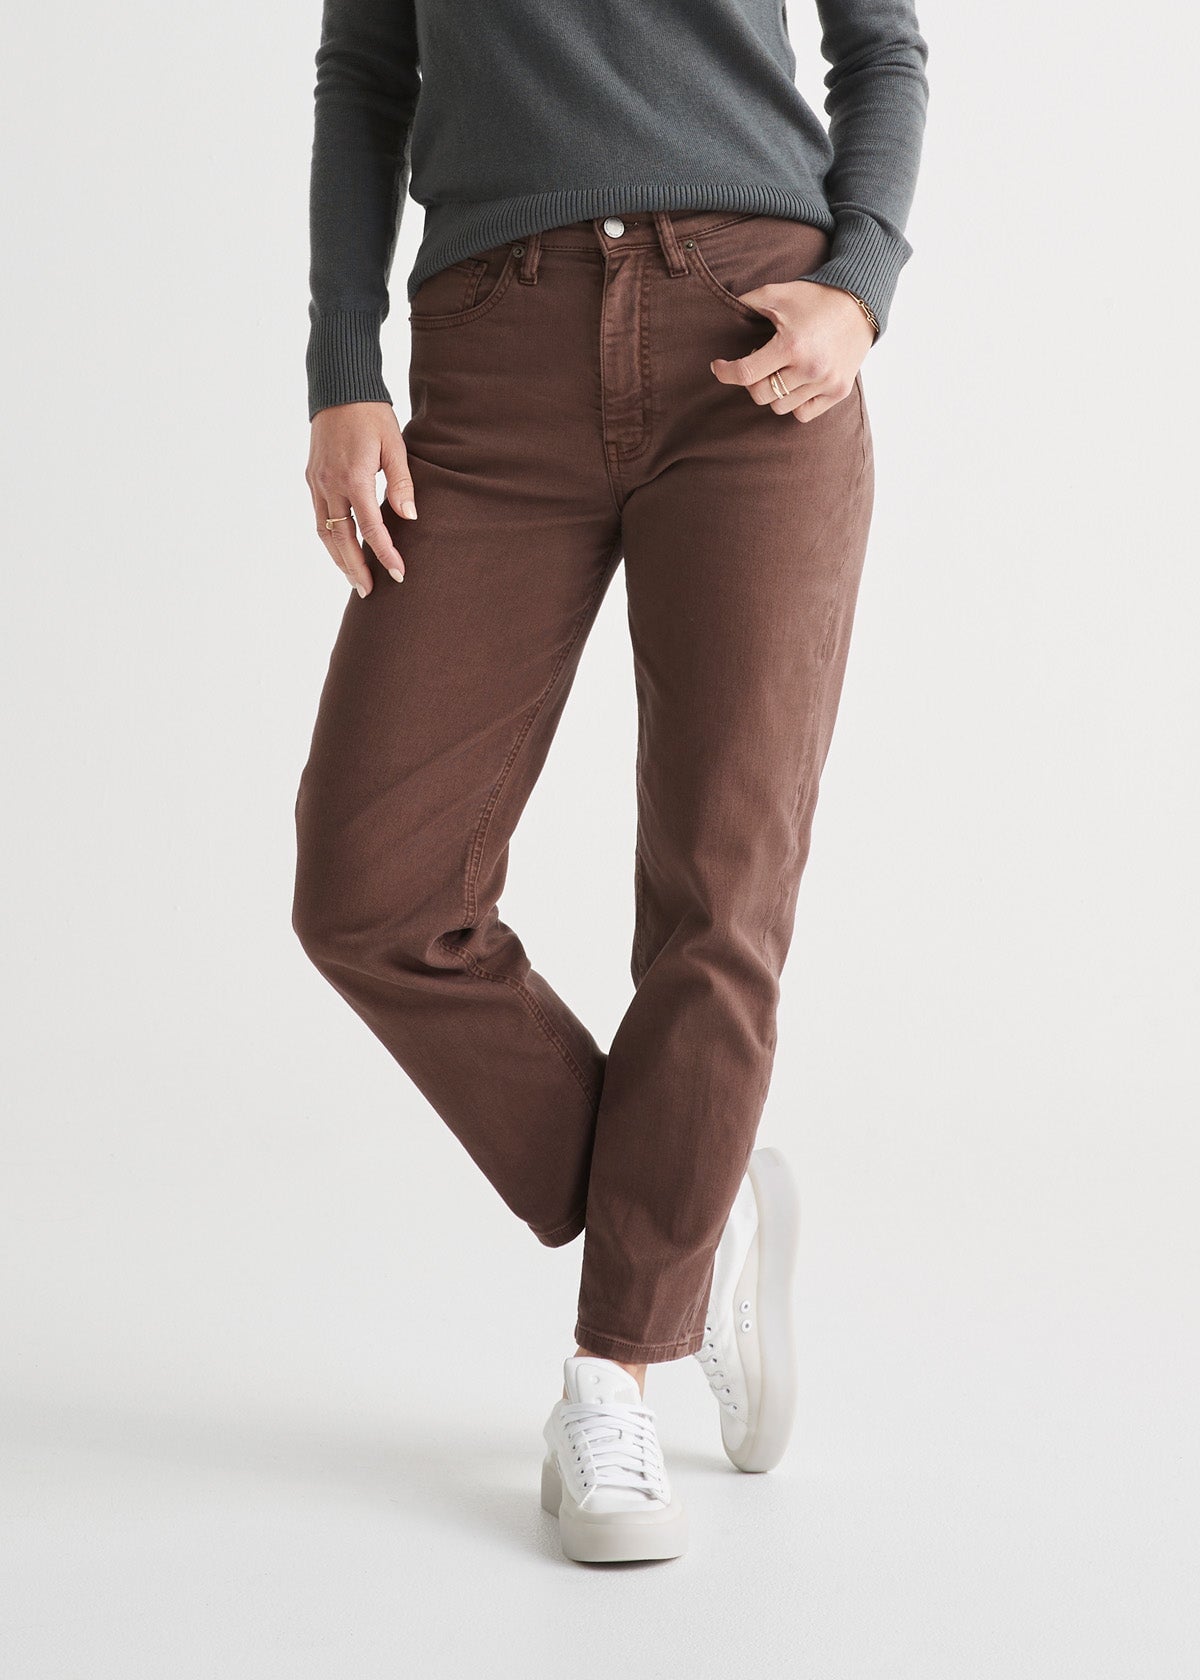 Women's Stretch Pants - Performance by DUER